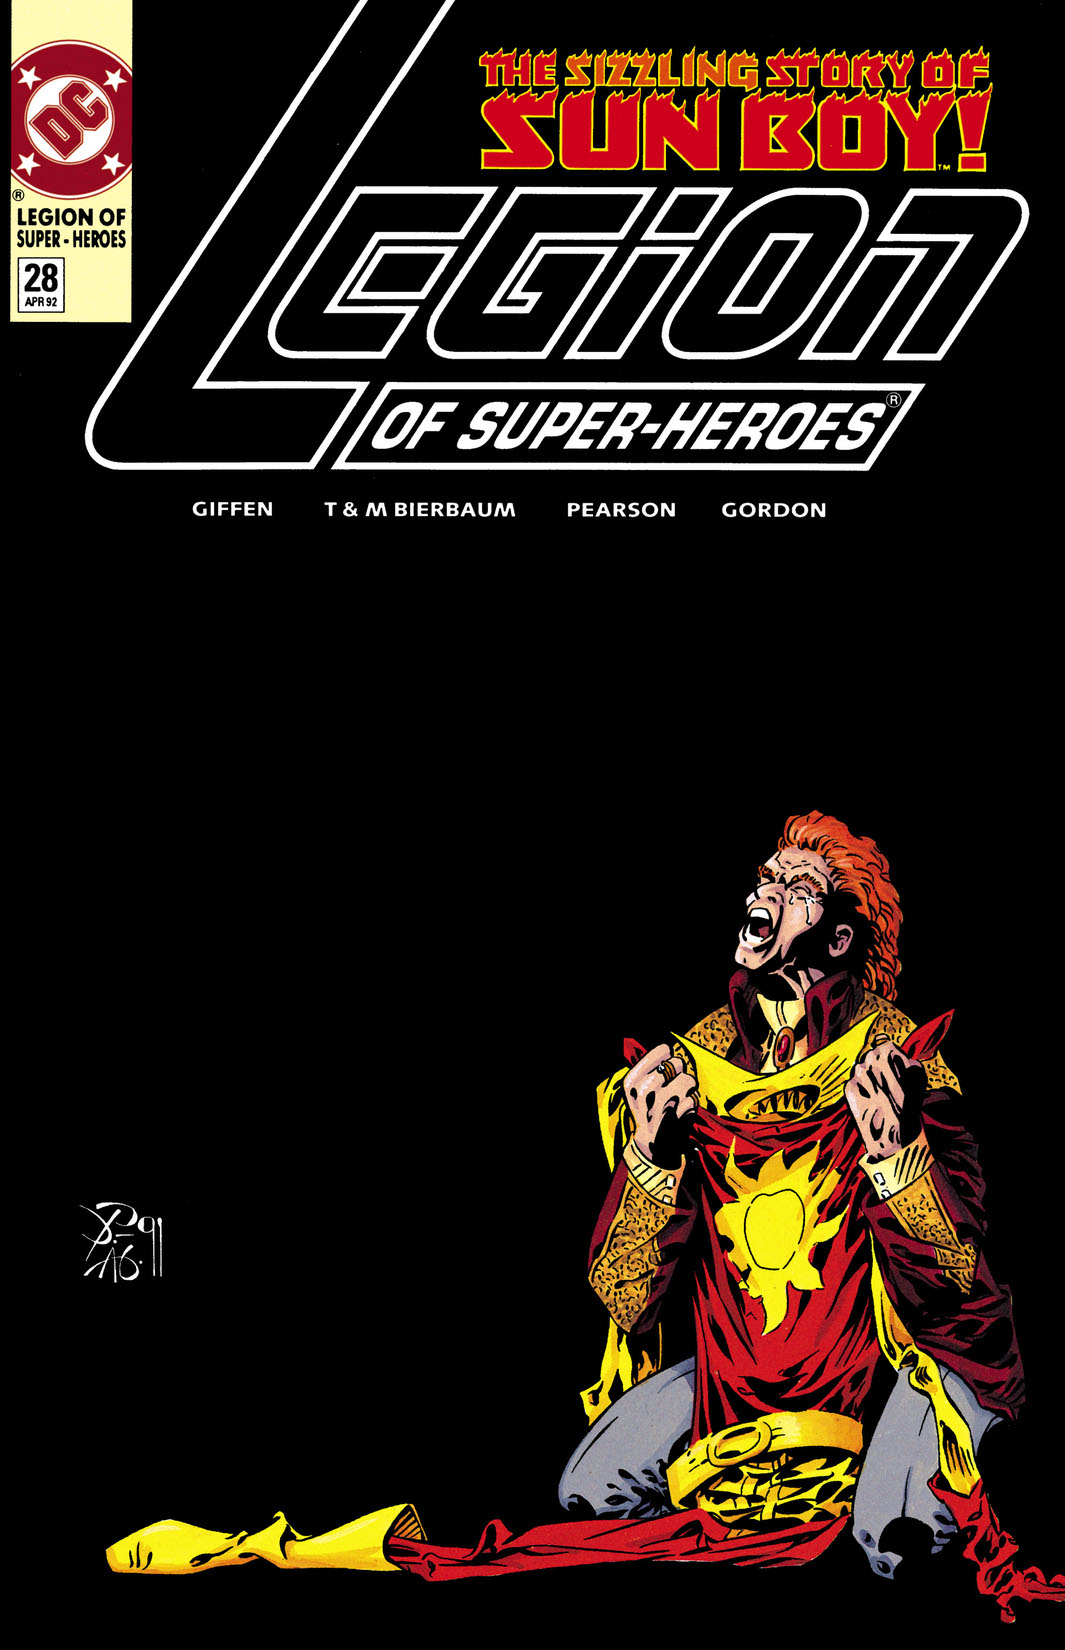 Legion of Super-Heroes (1989-) #28 preview images